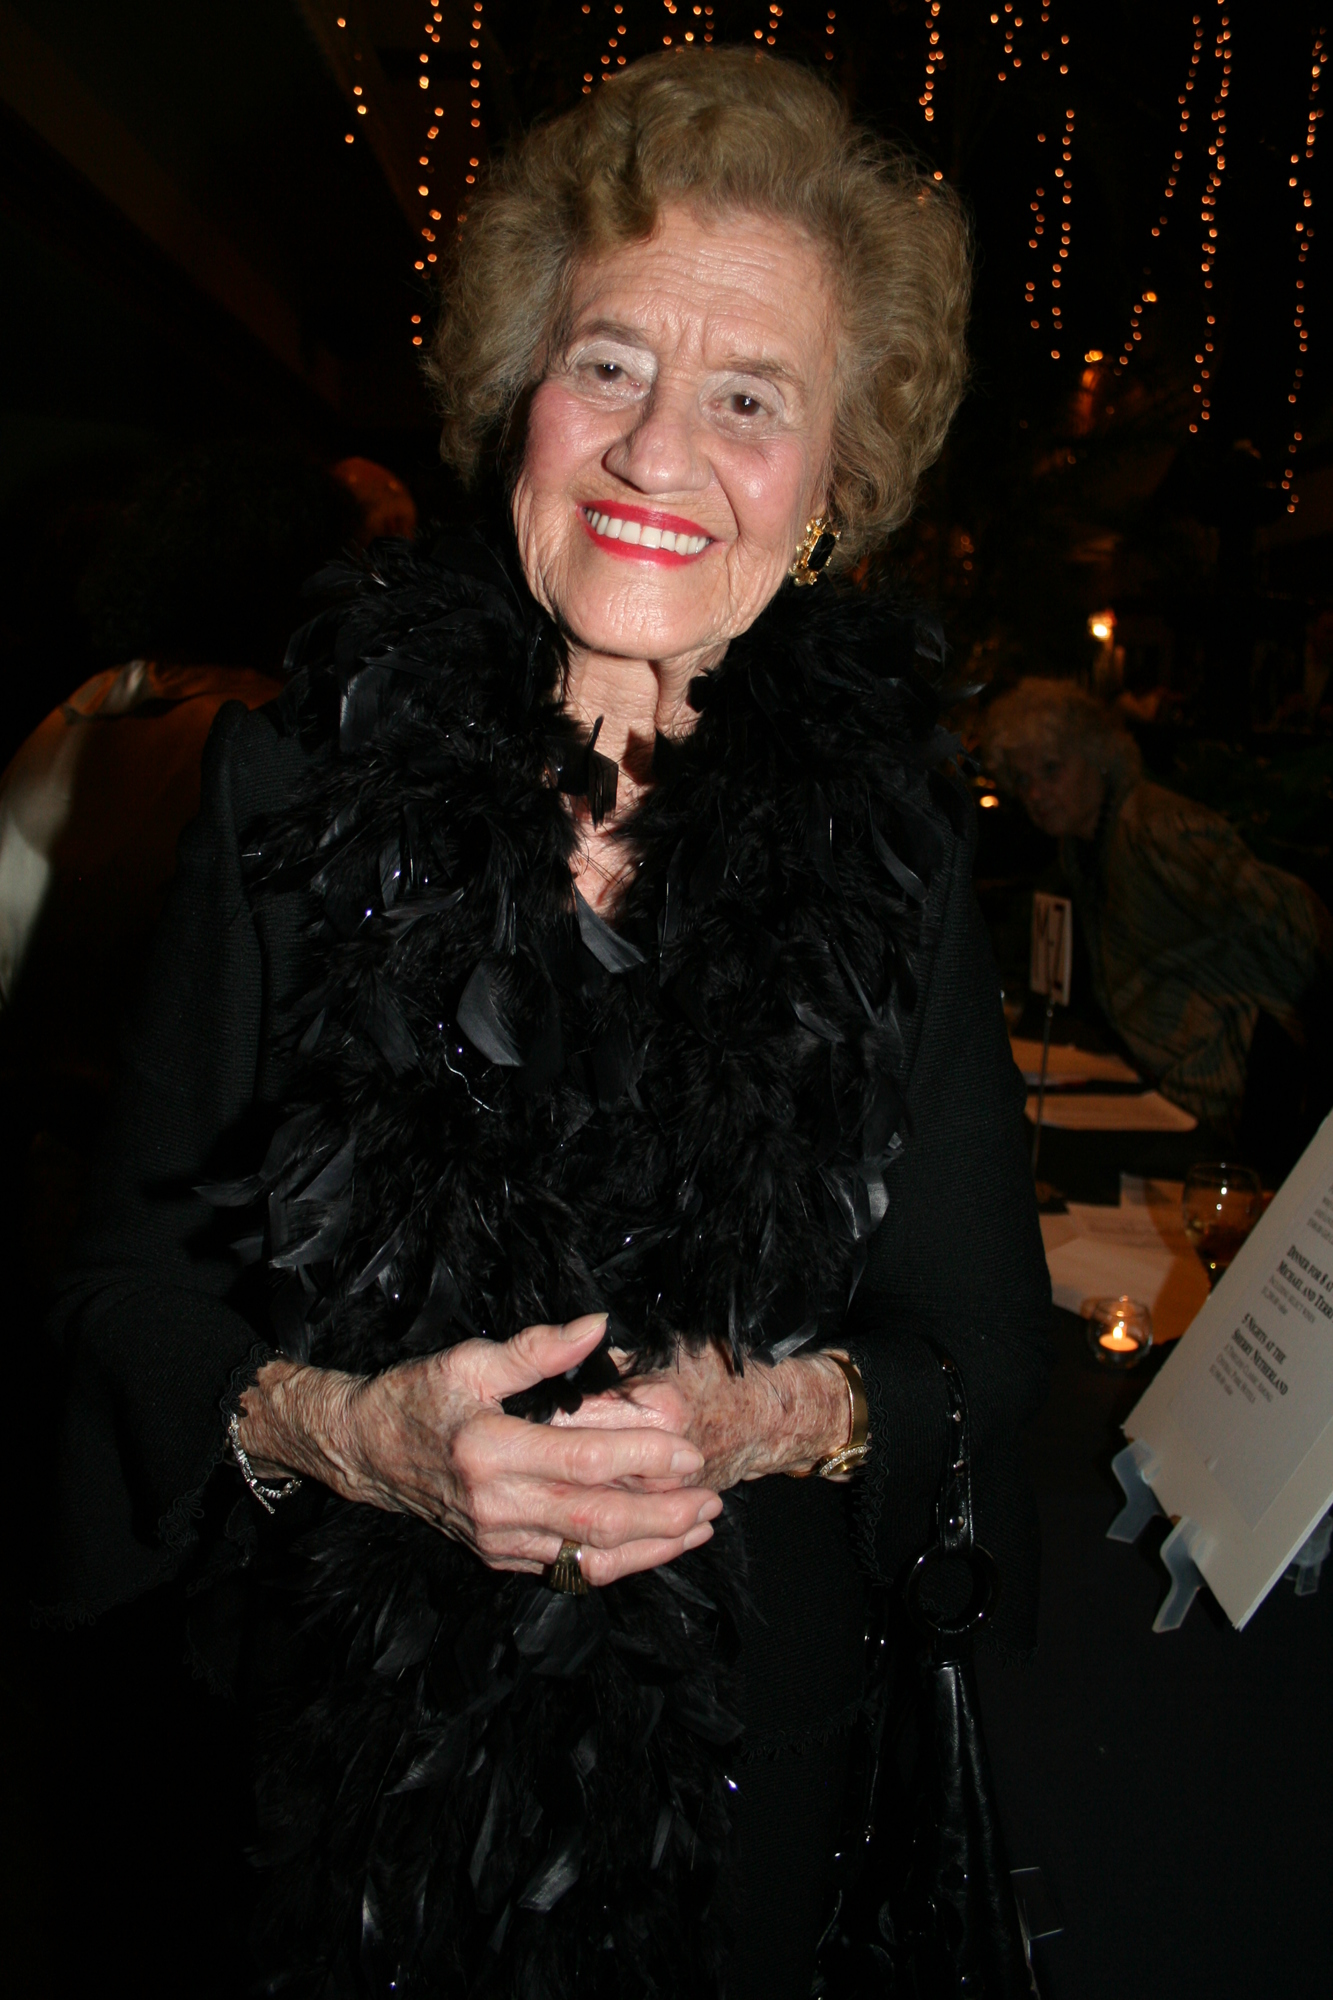 Betty Schoenbaum is a regular at black tie fundraiser events. Here, she is pictured Jan. 17, 2010, at Generations honoring Ron and Janis Collier. File photo